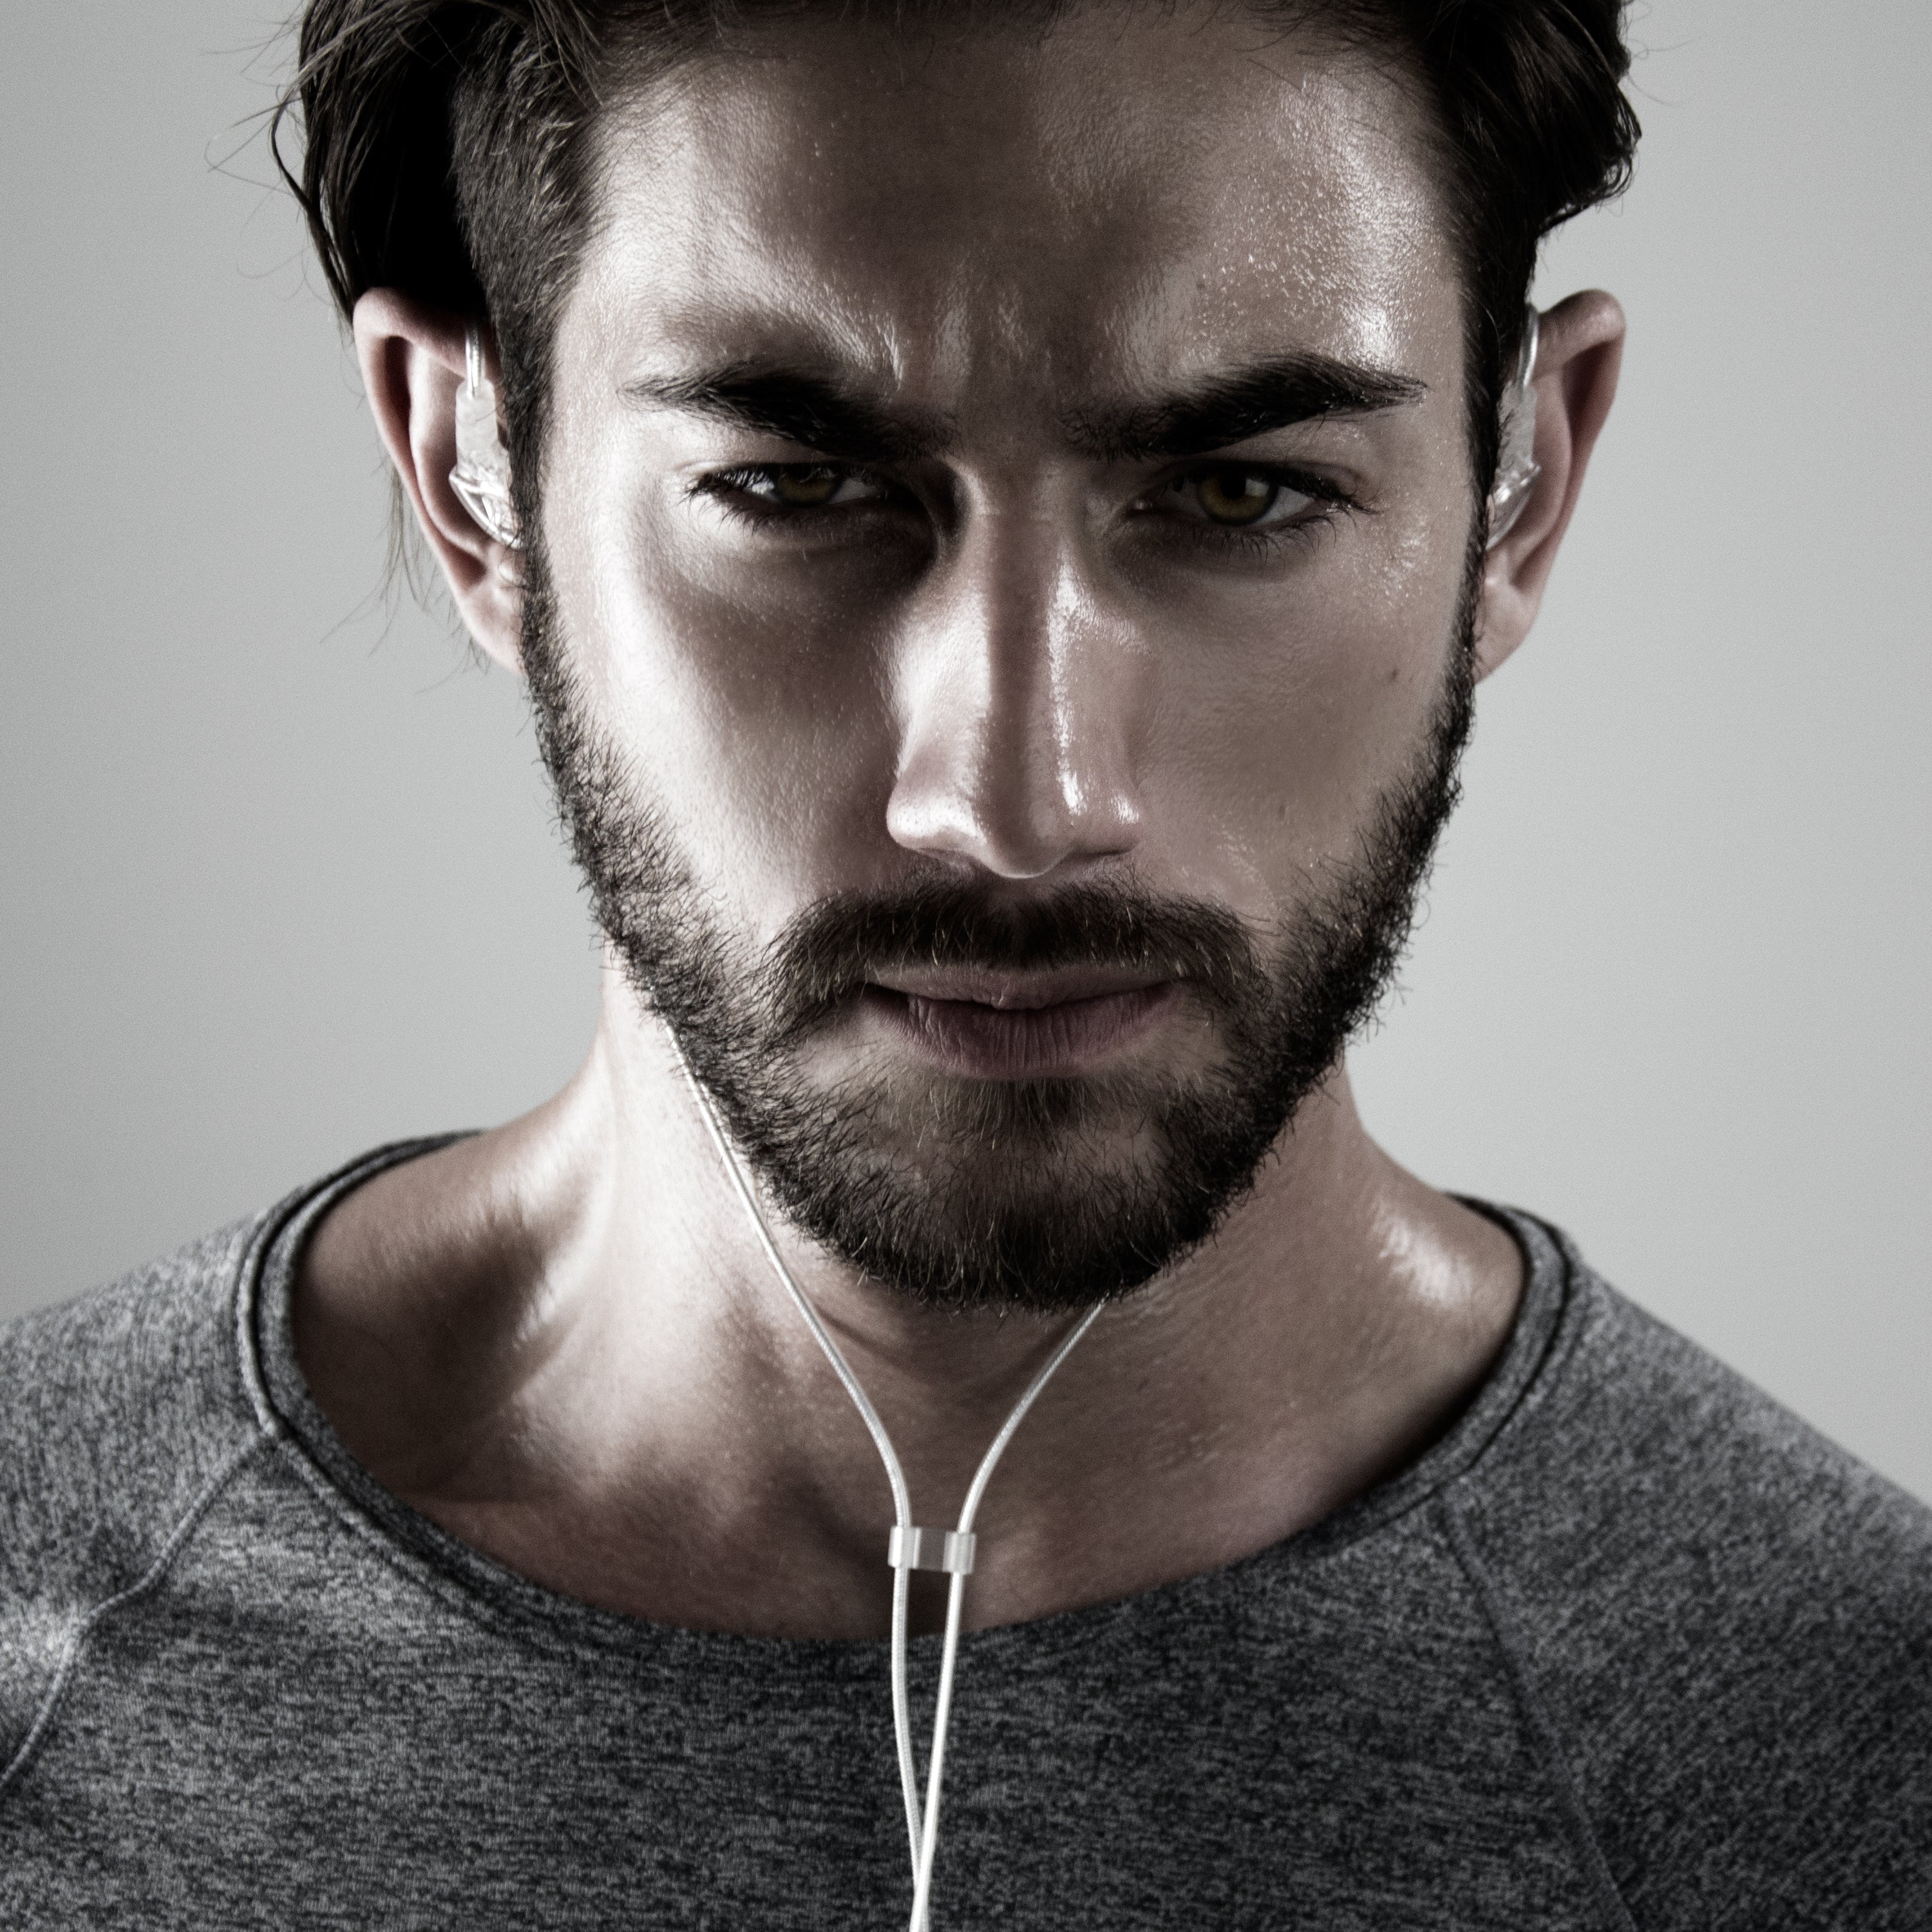 Close-up portrait of a man with a beard, intense gaze, and earphones, wearing a gray t-shirt on a neutral background.